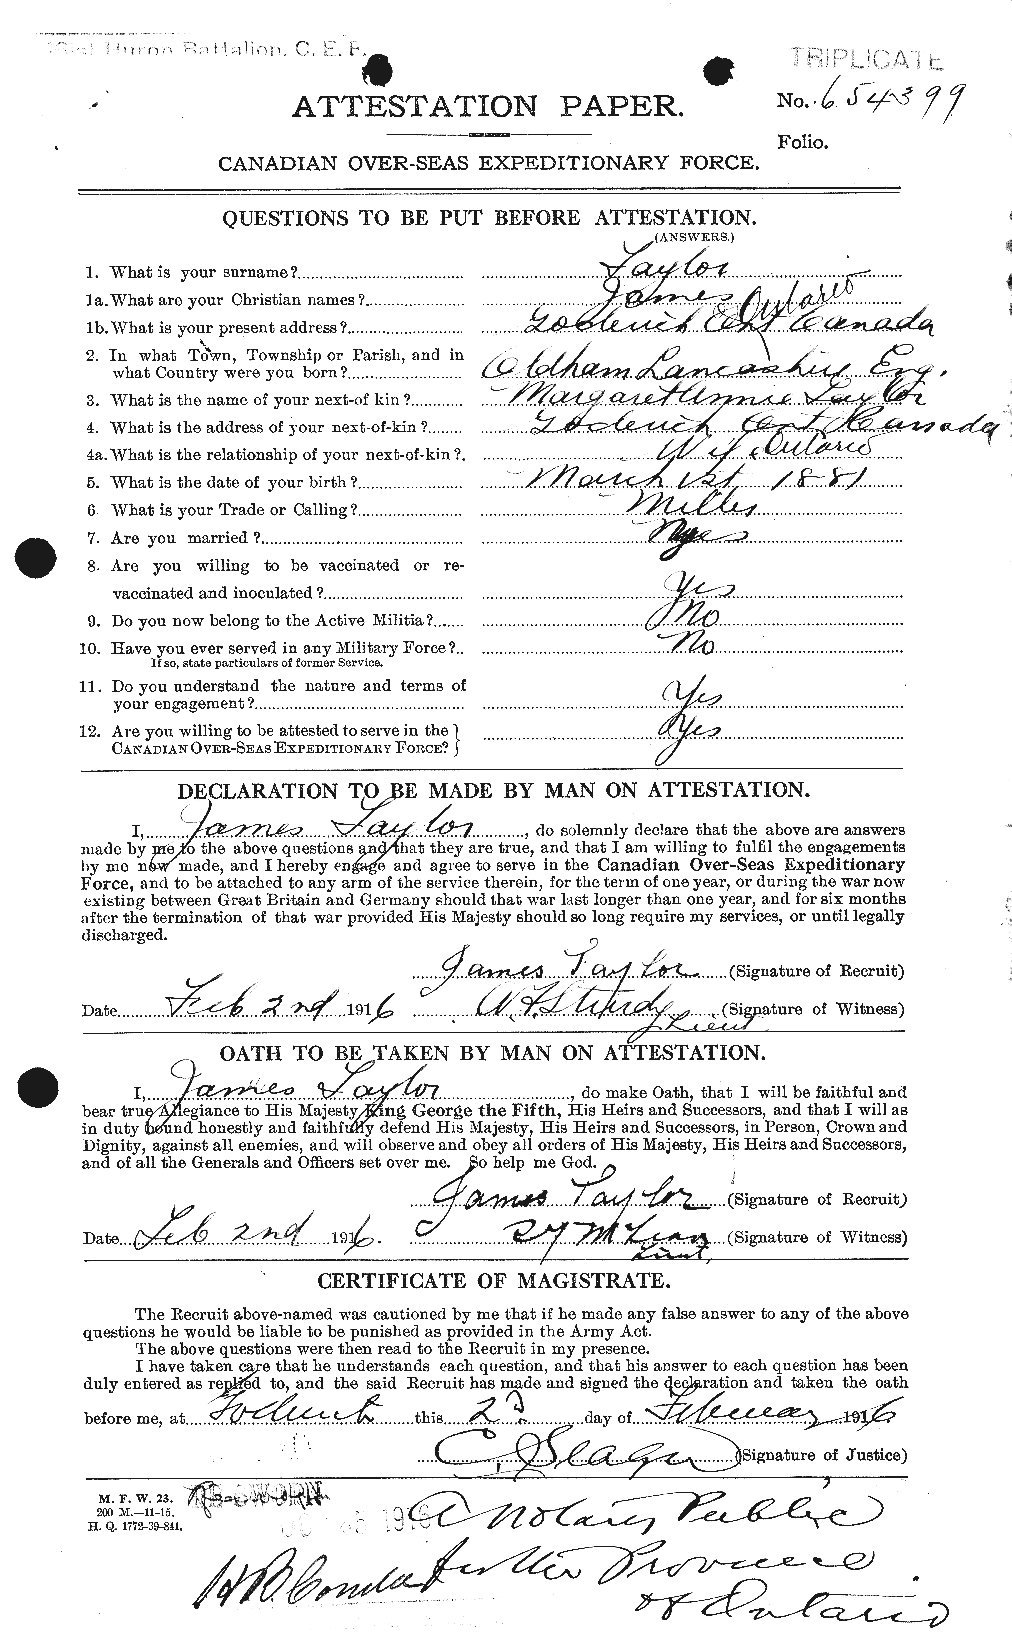 Personnel Records of the First World War - CEF 626650a